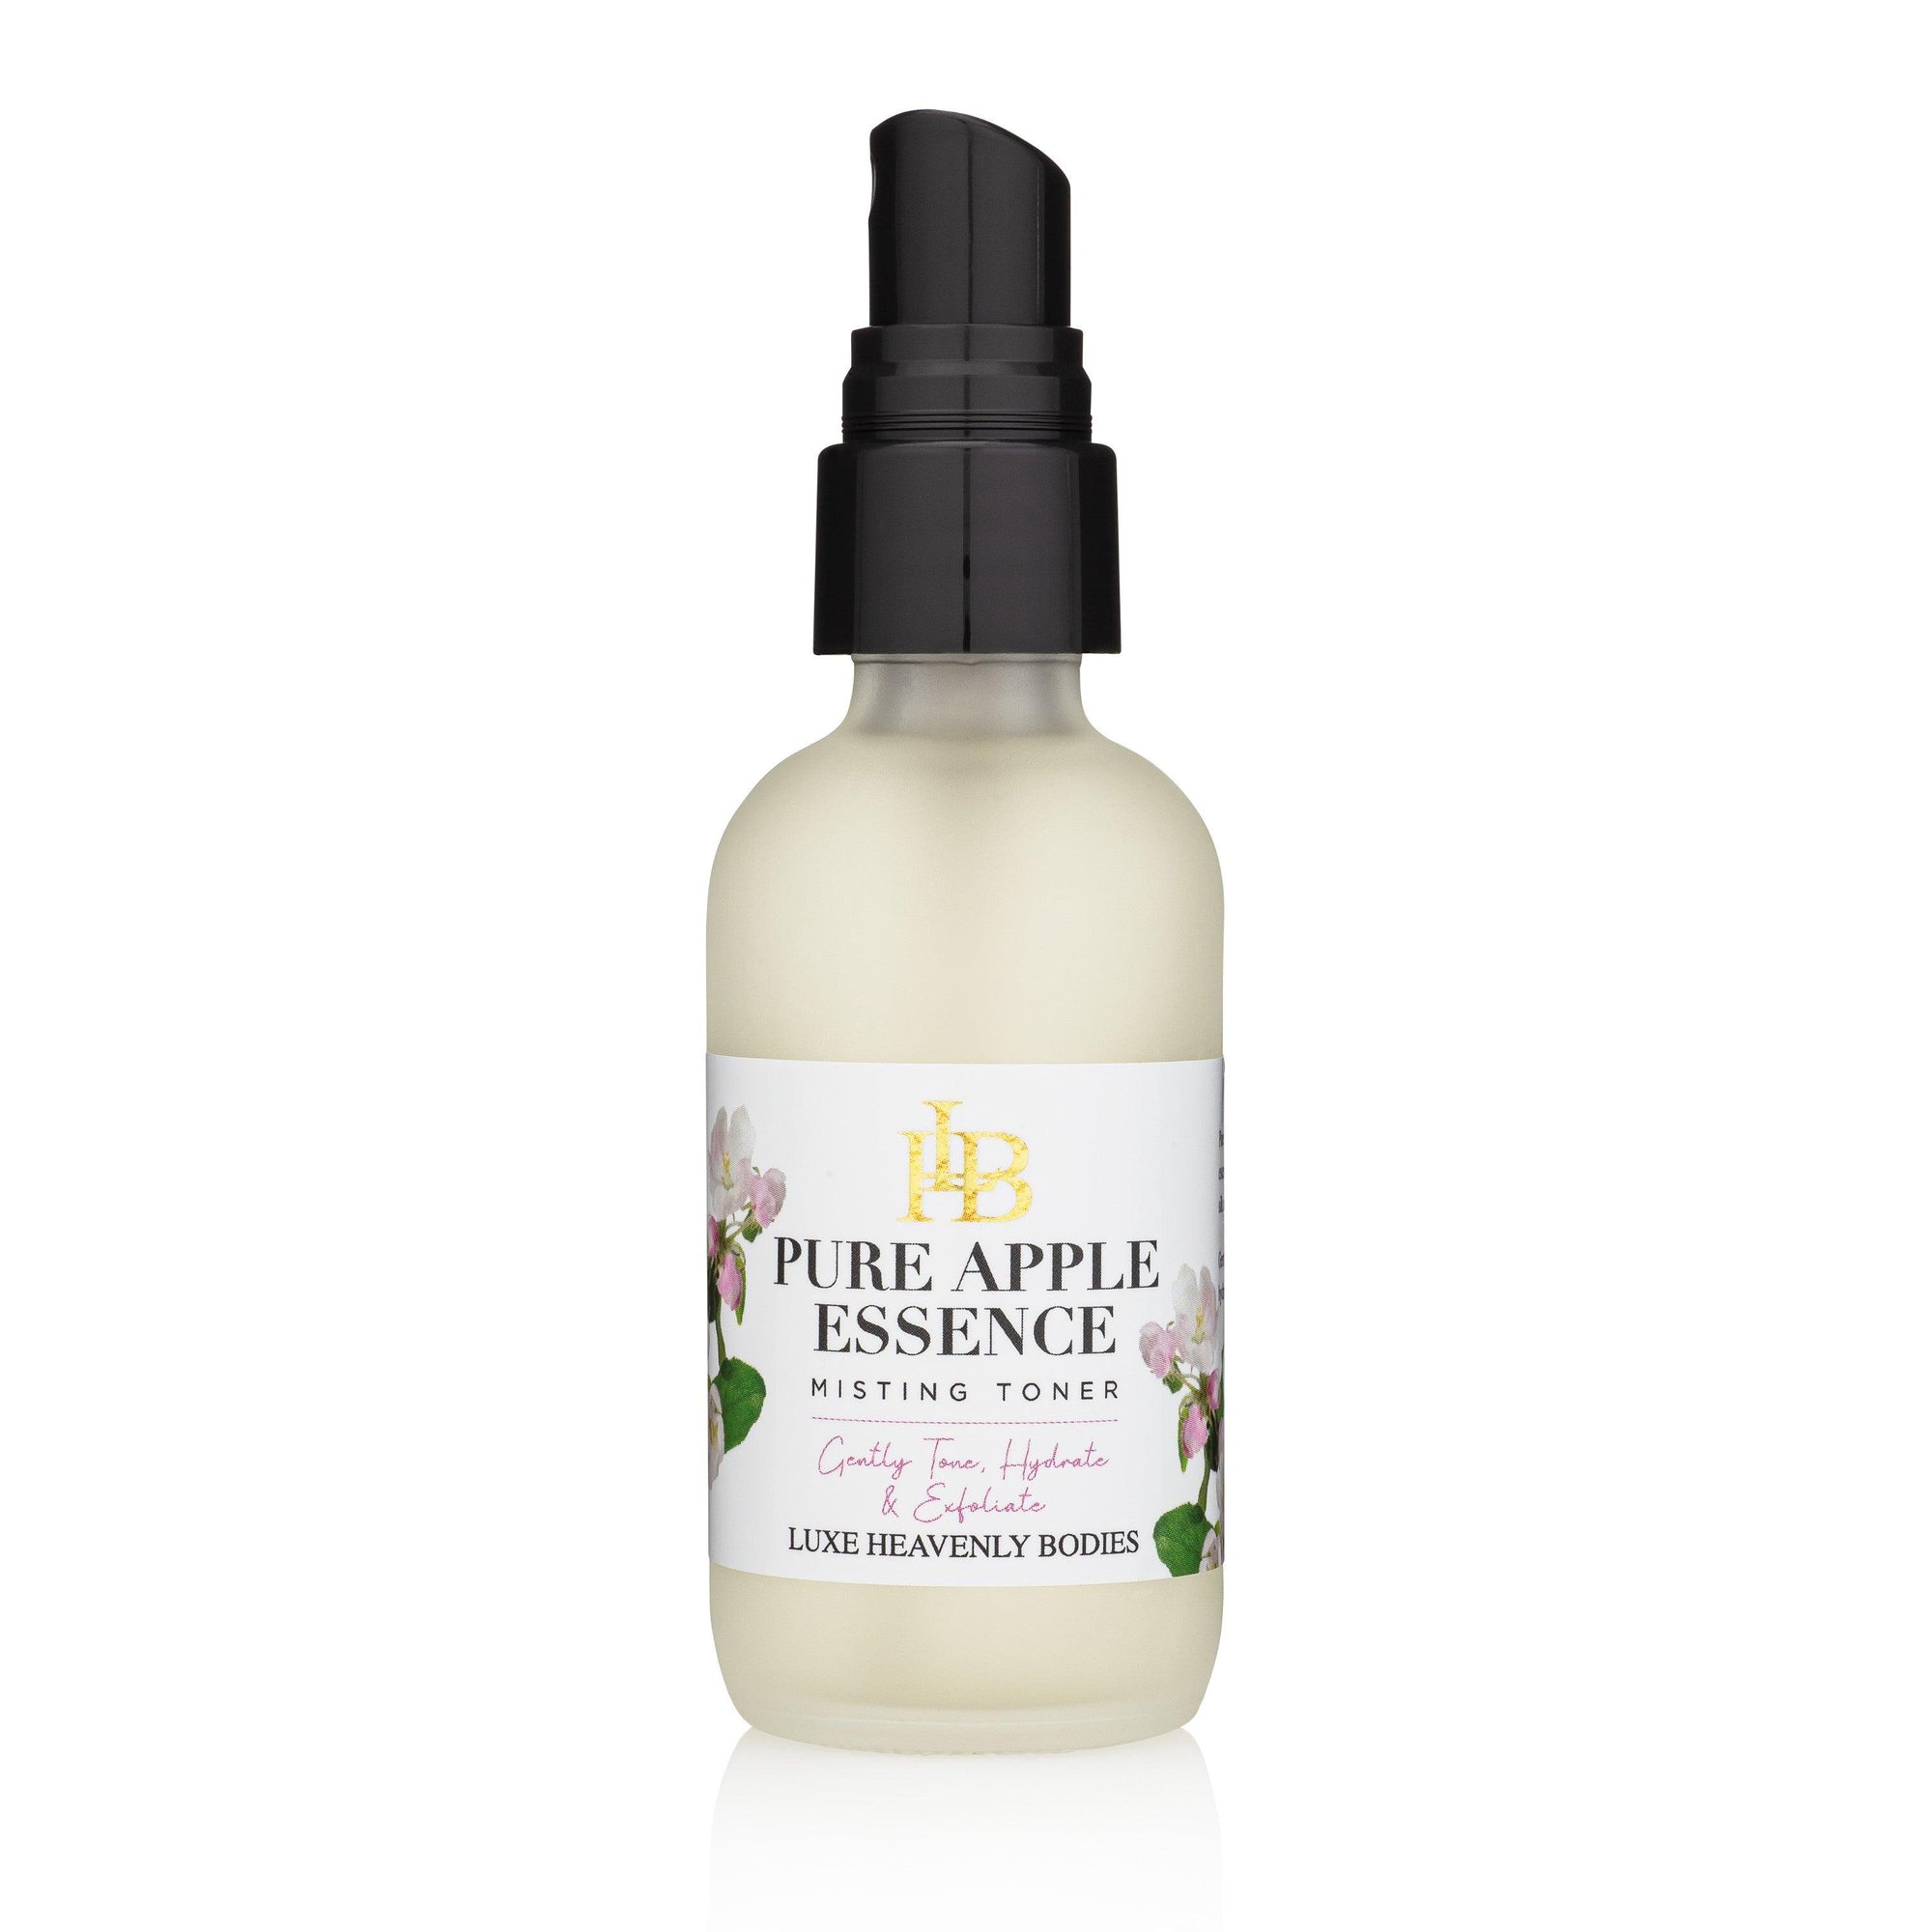 Pure Apple Essence Misting Toner - LUXE Heavenly Bodies